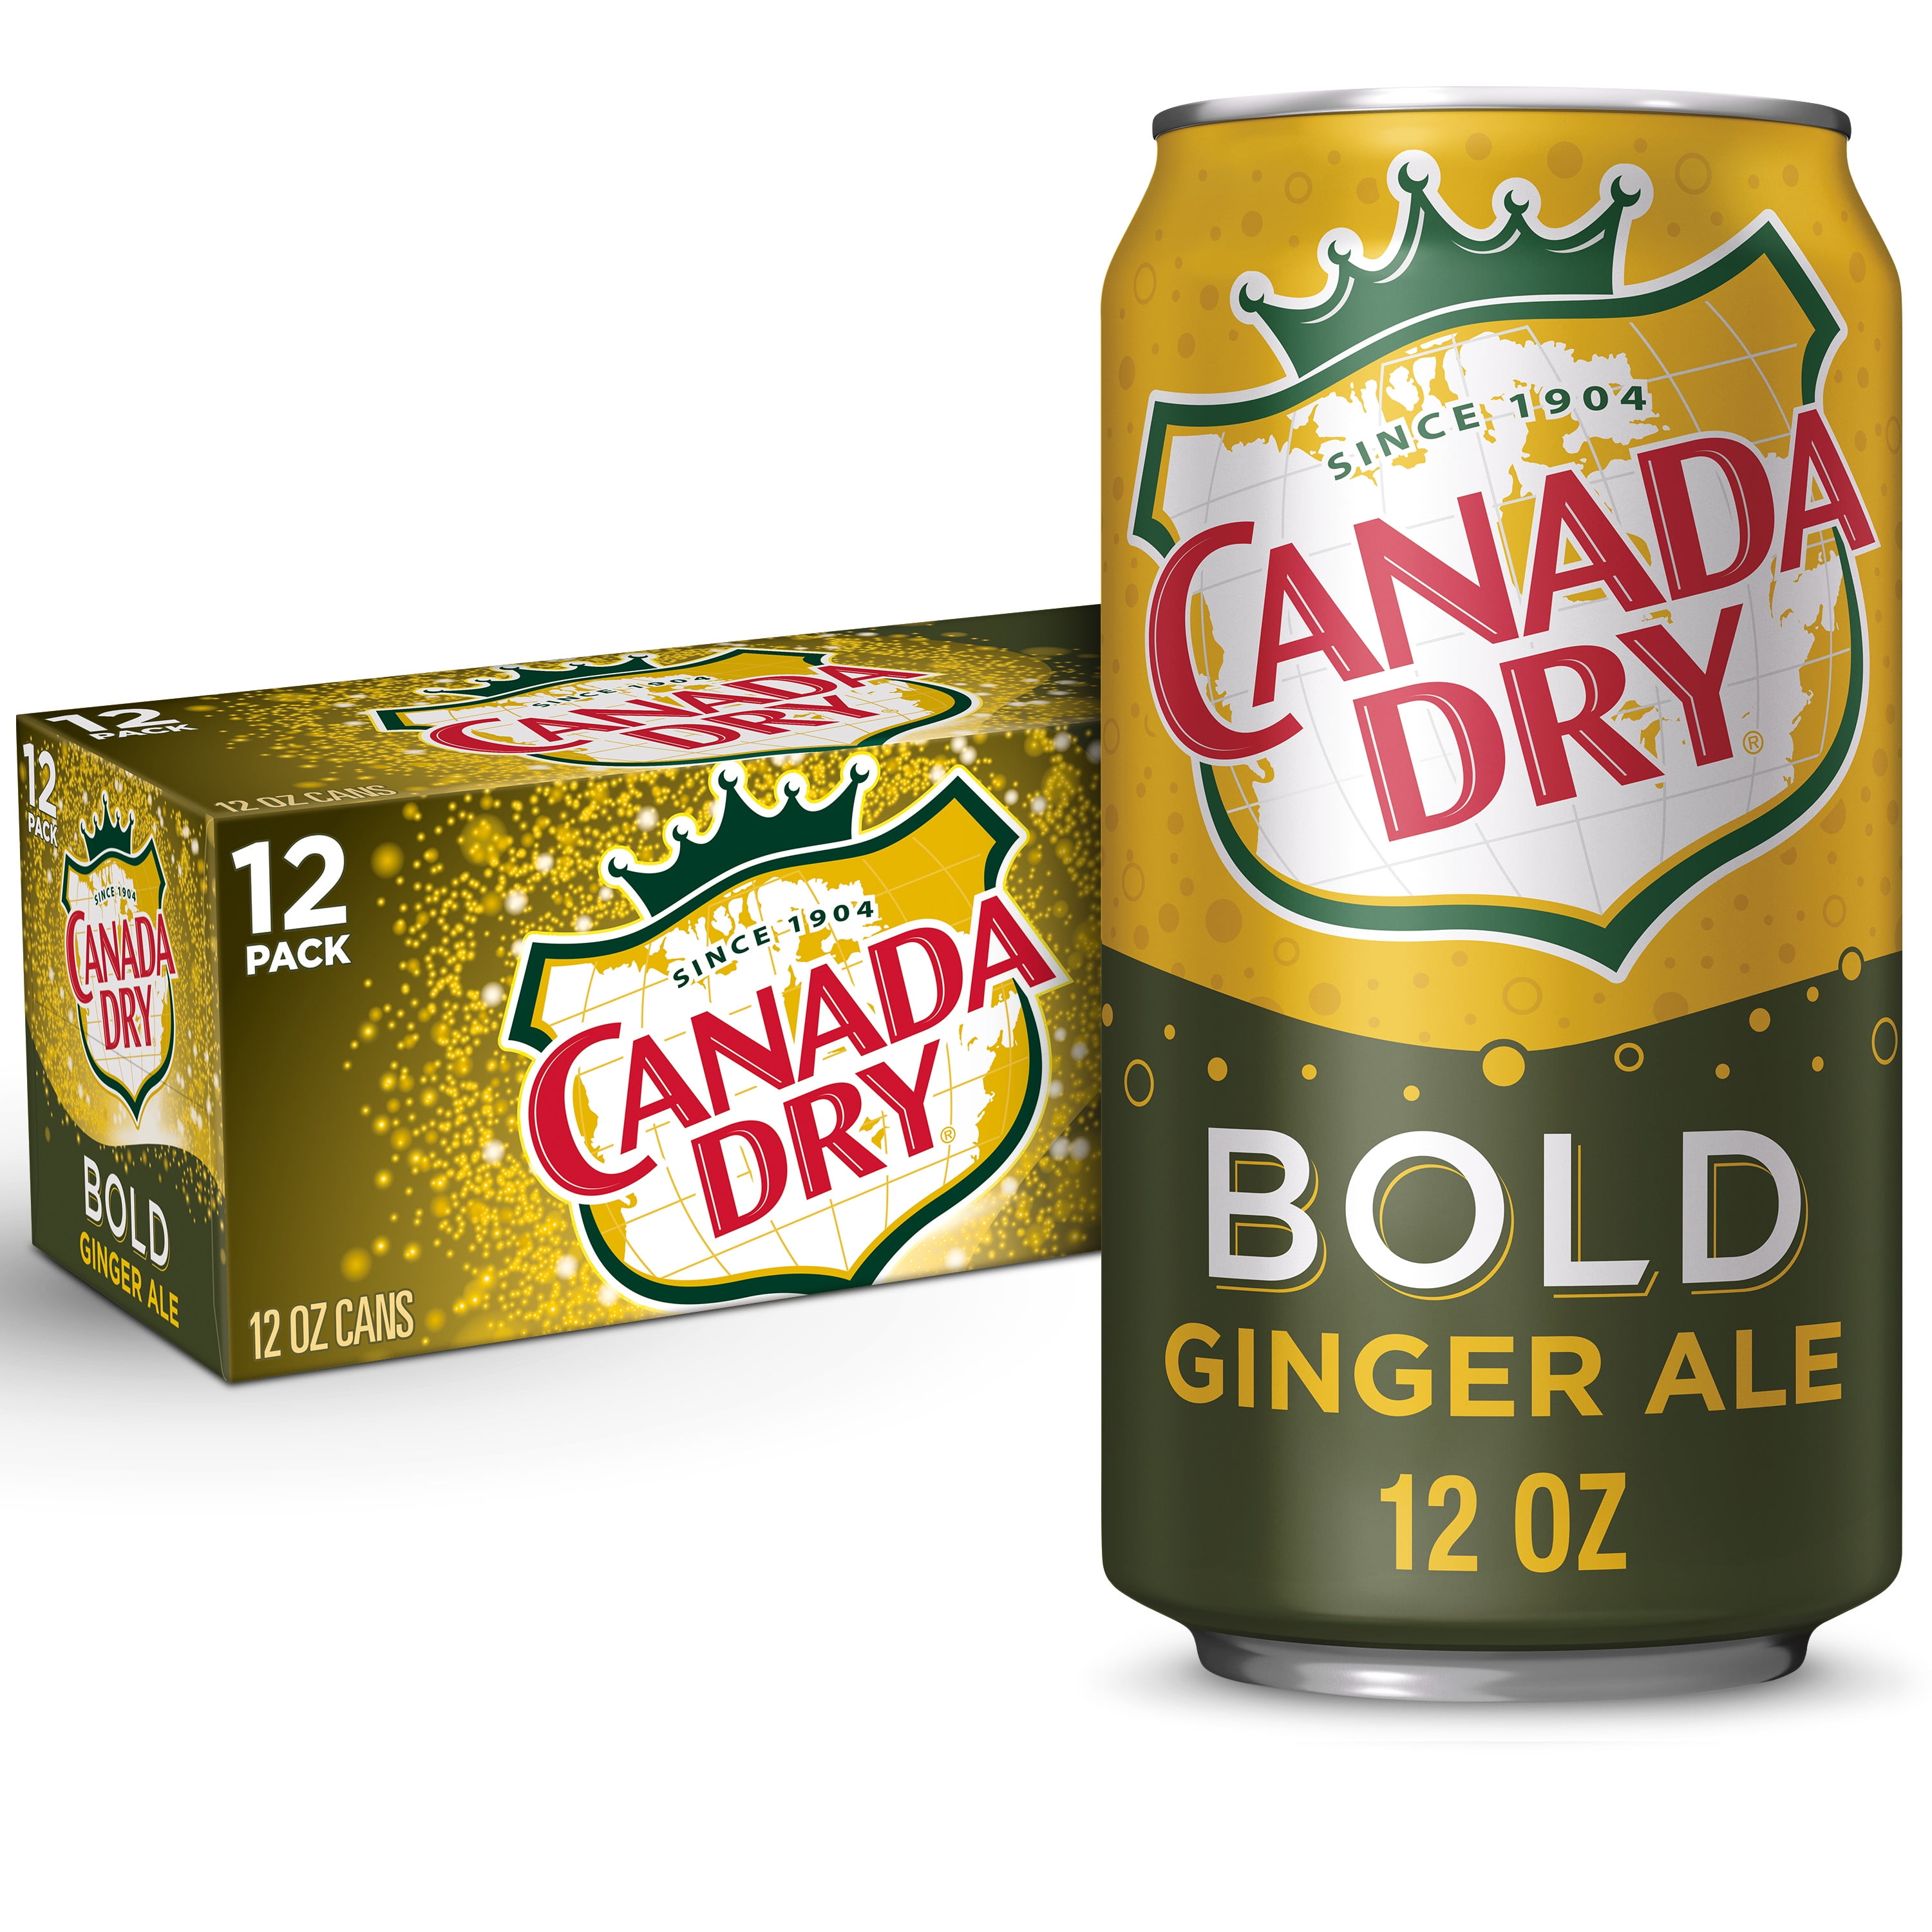 Canada Dry Bold Ginger Ale Soda, 12 fl oz cans, 12 pack